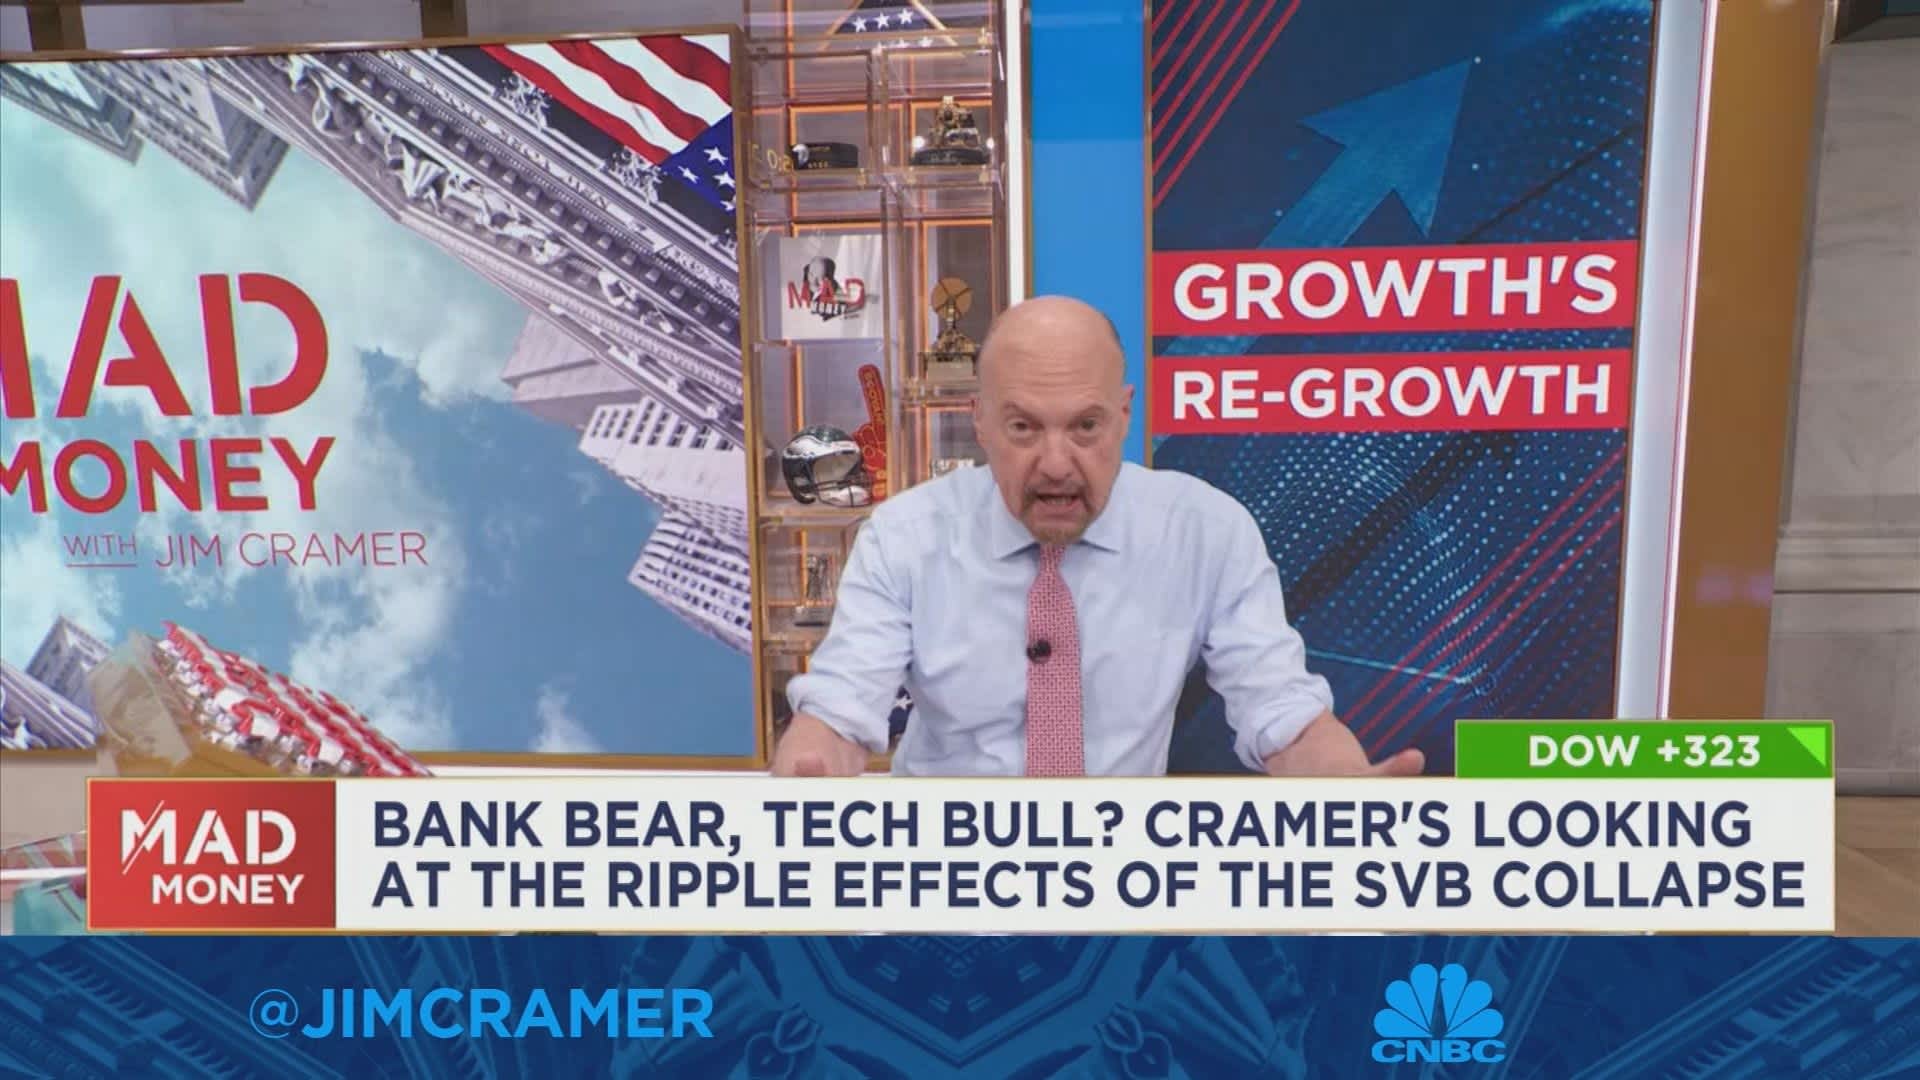 Bank Bear, Tech Bull? Cramer's looking at the ripple effects of the SVB collapse